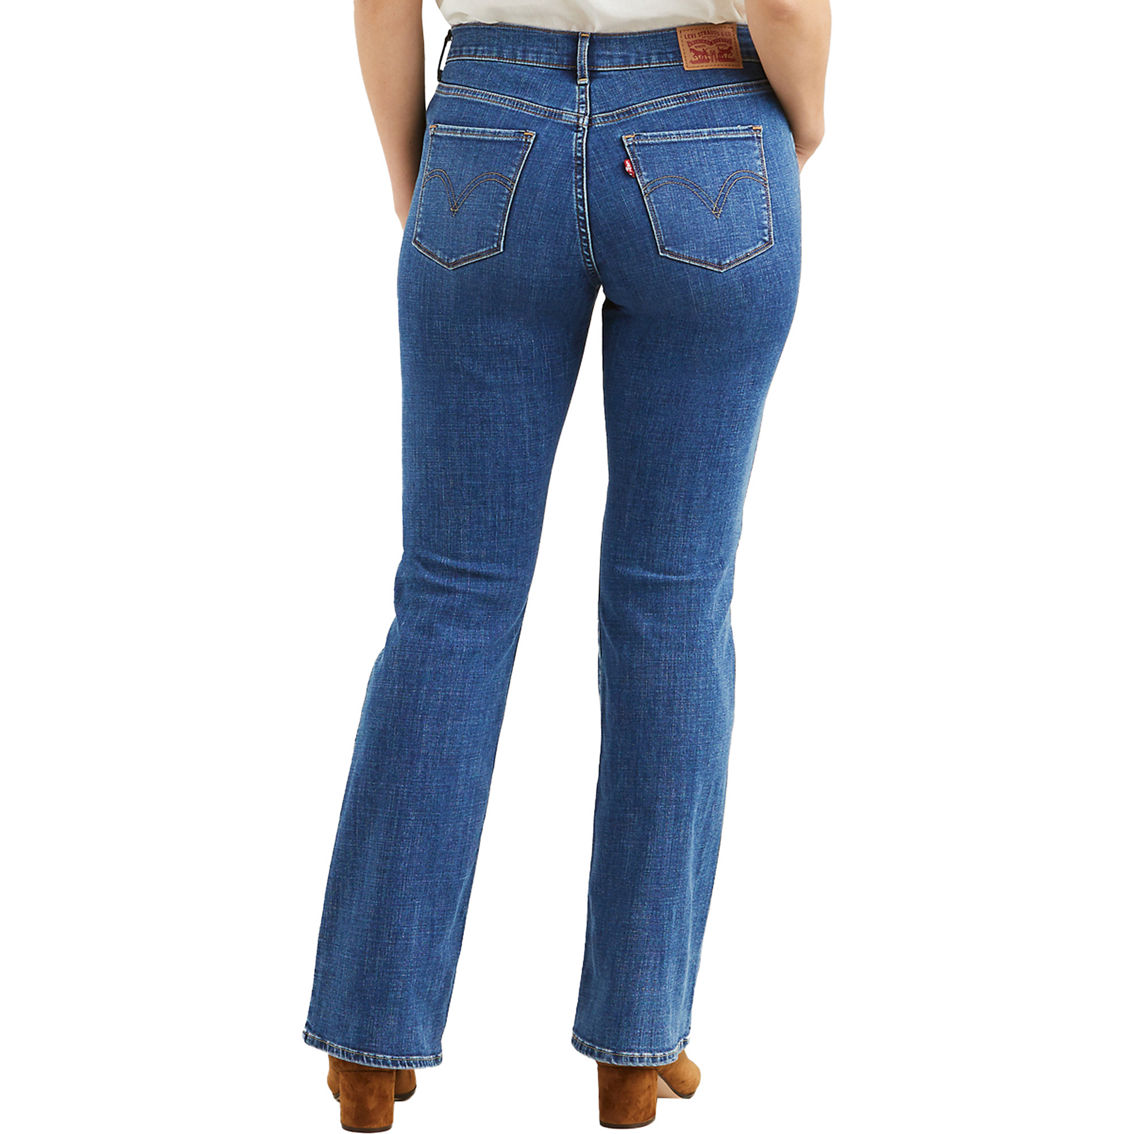 Levi's Classic Bootcut Jeans - Image 2 of 3